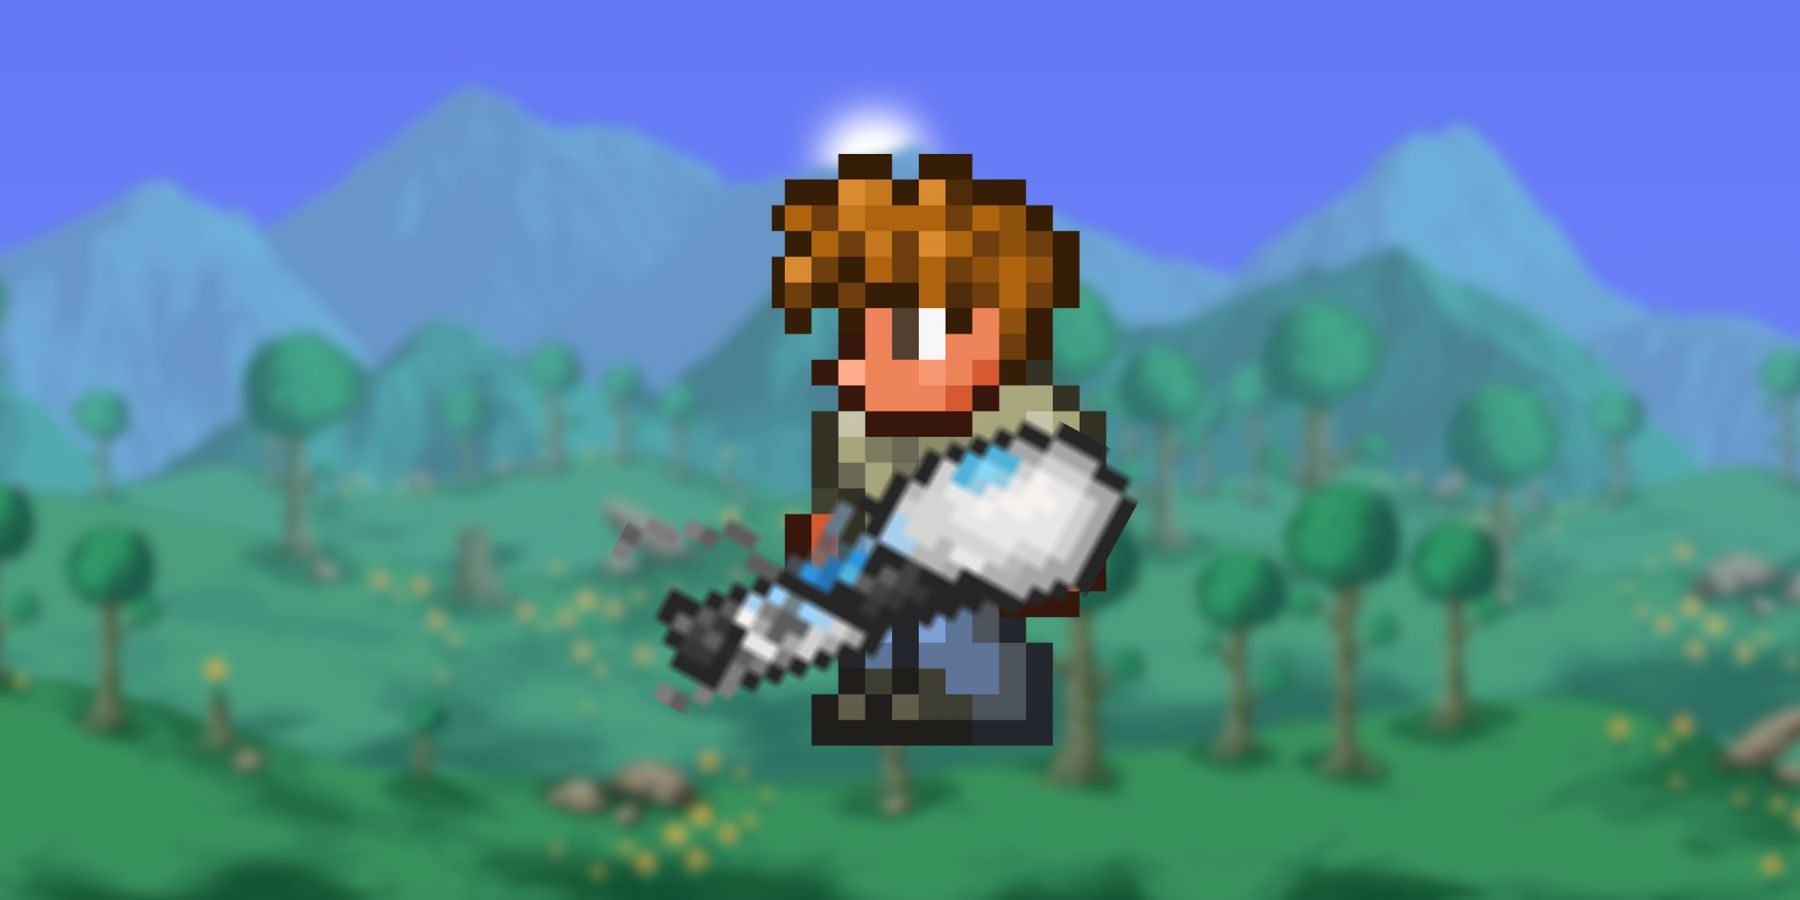 The character with a Portal Gun in Terraria